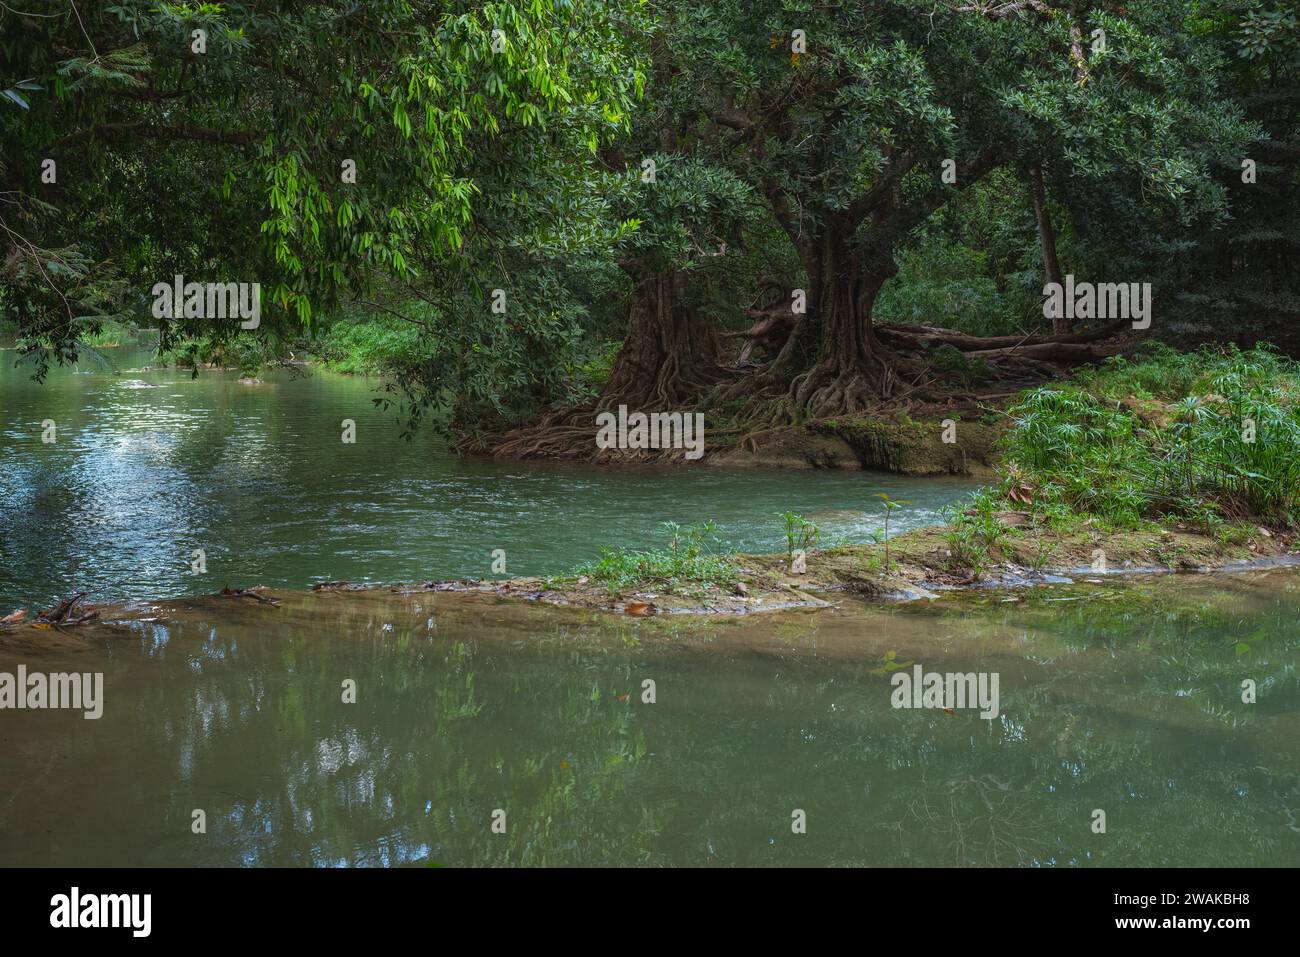 Tranquil tropical landscape in evening. Muak Lek River and banyan trees with bizarre roots in Chet Sao Noi National Park, Thailand. Stock Photo